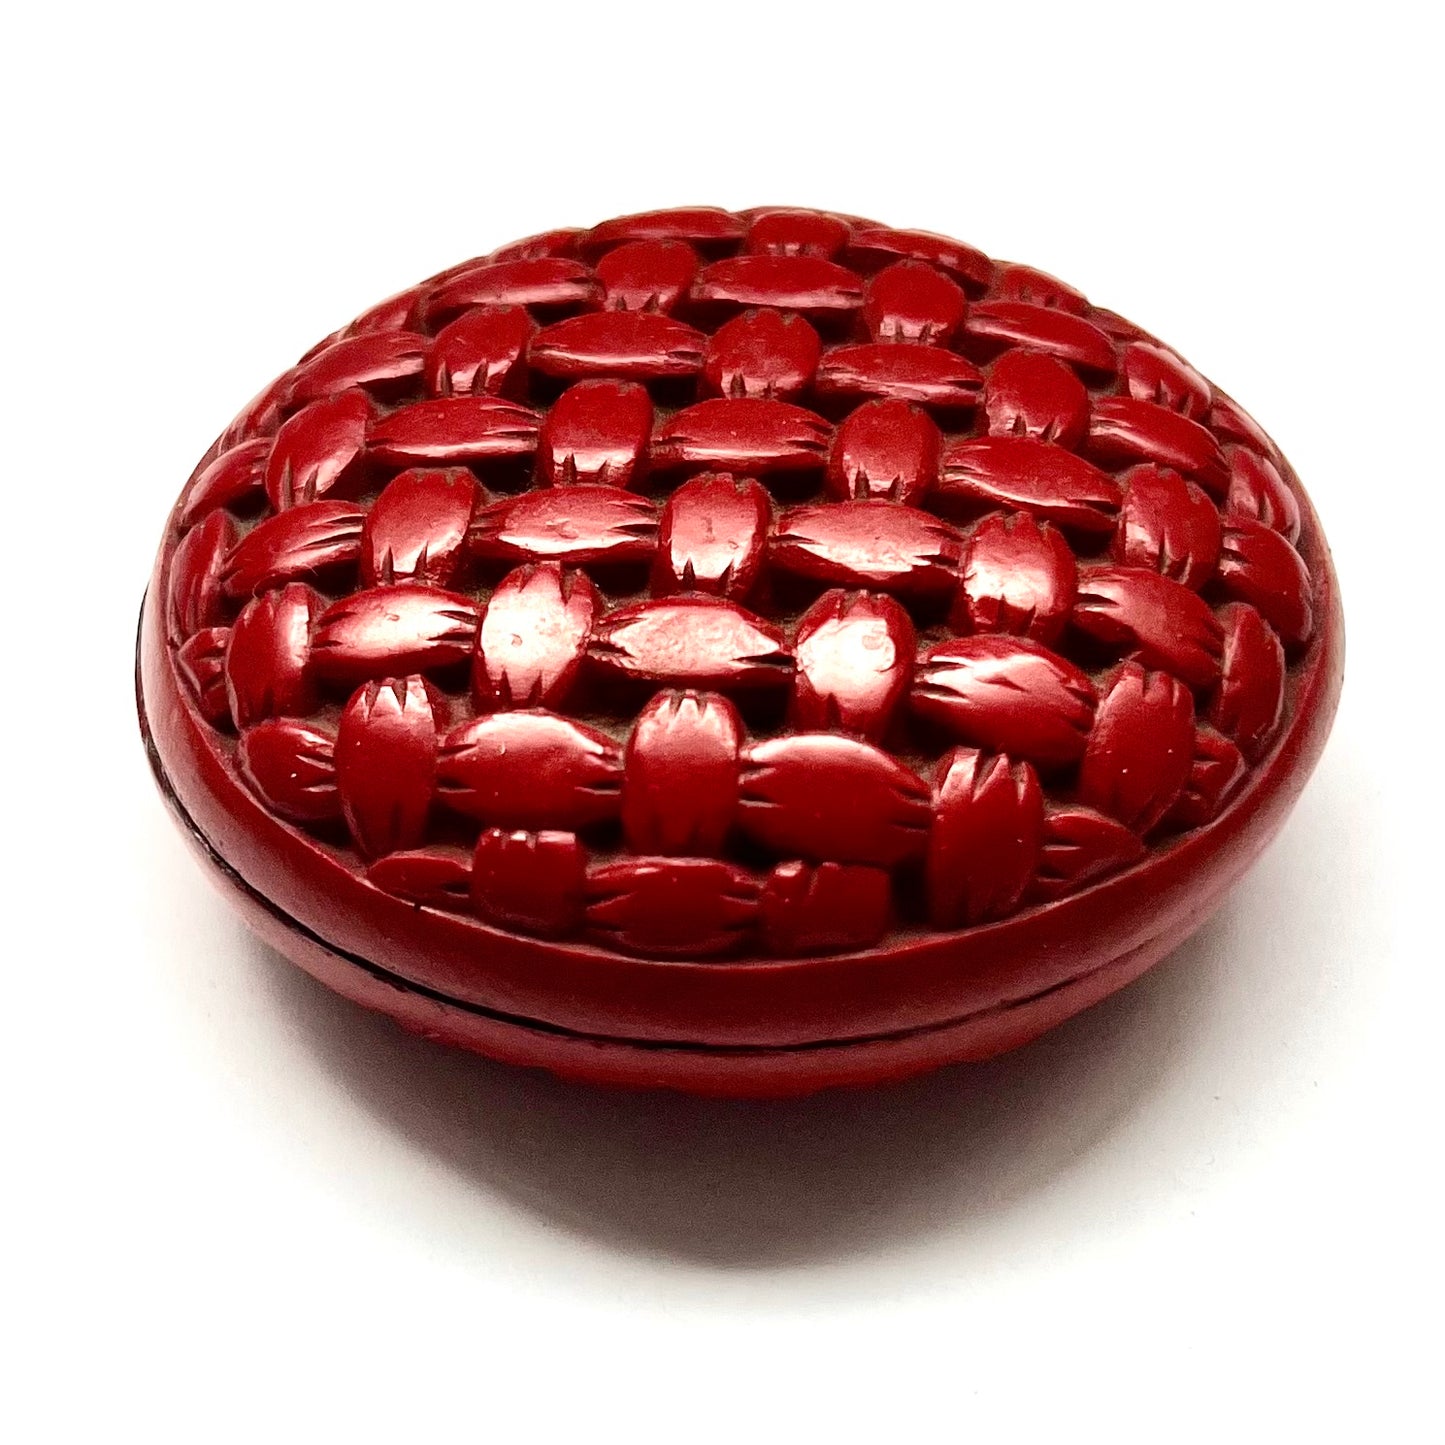 Antique Japanese Meiji Period cinnabar lacquer box, carved with knot pattern